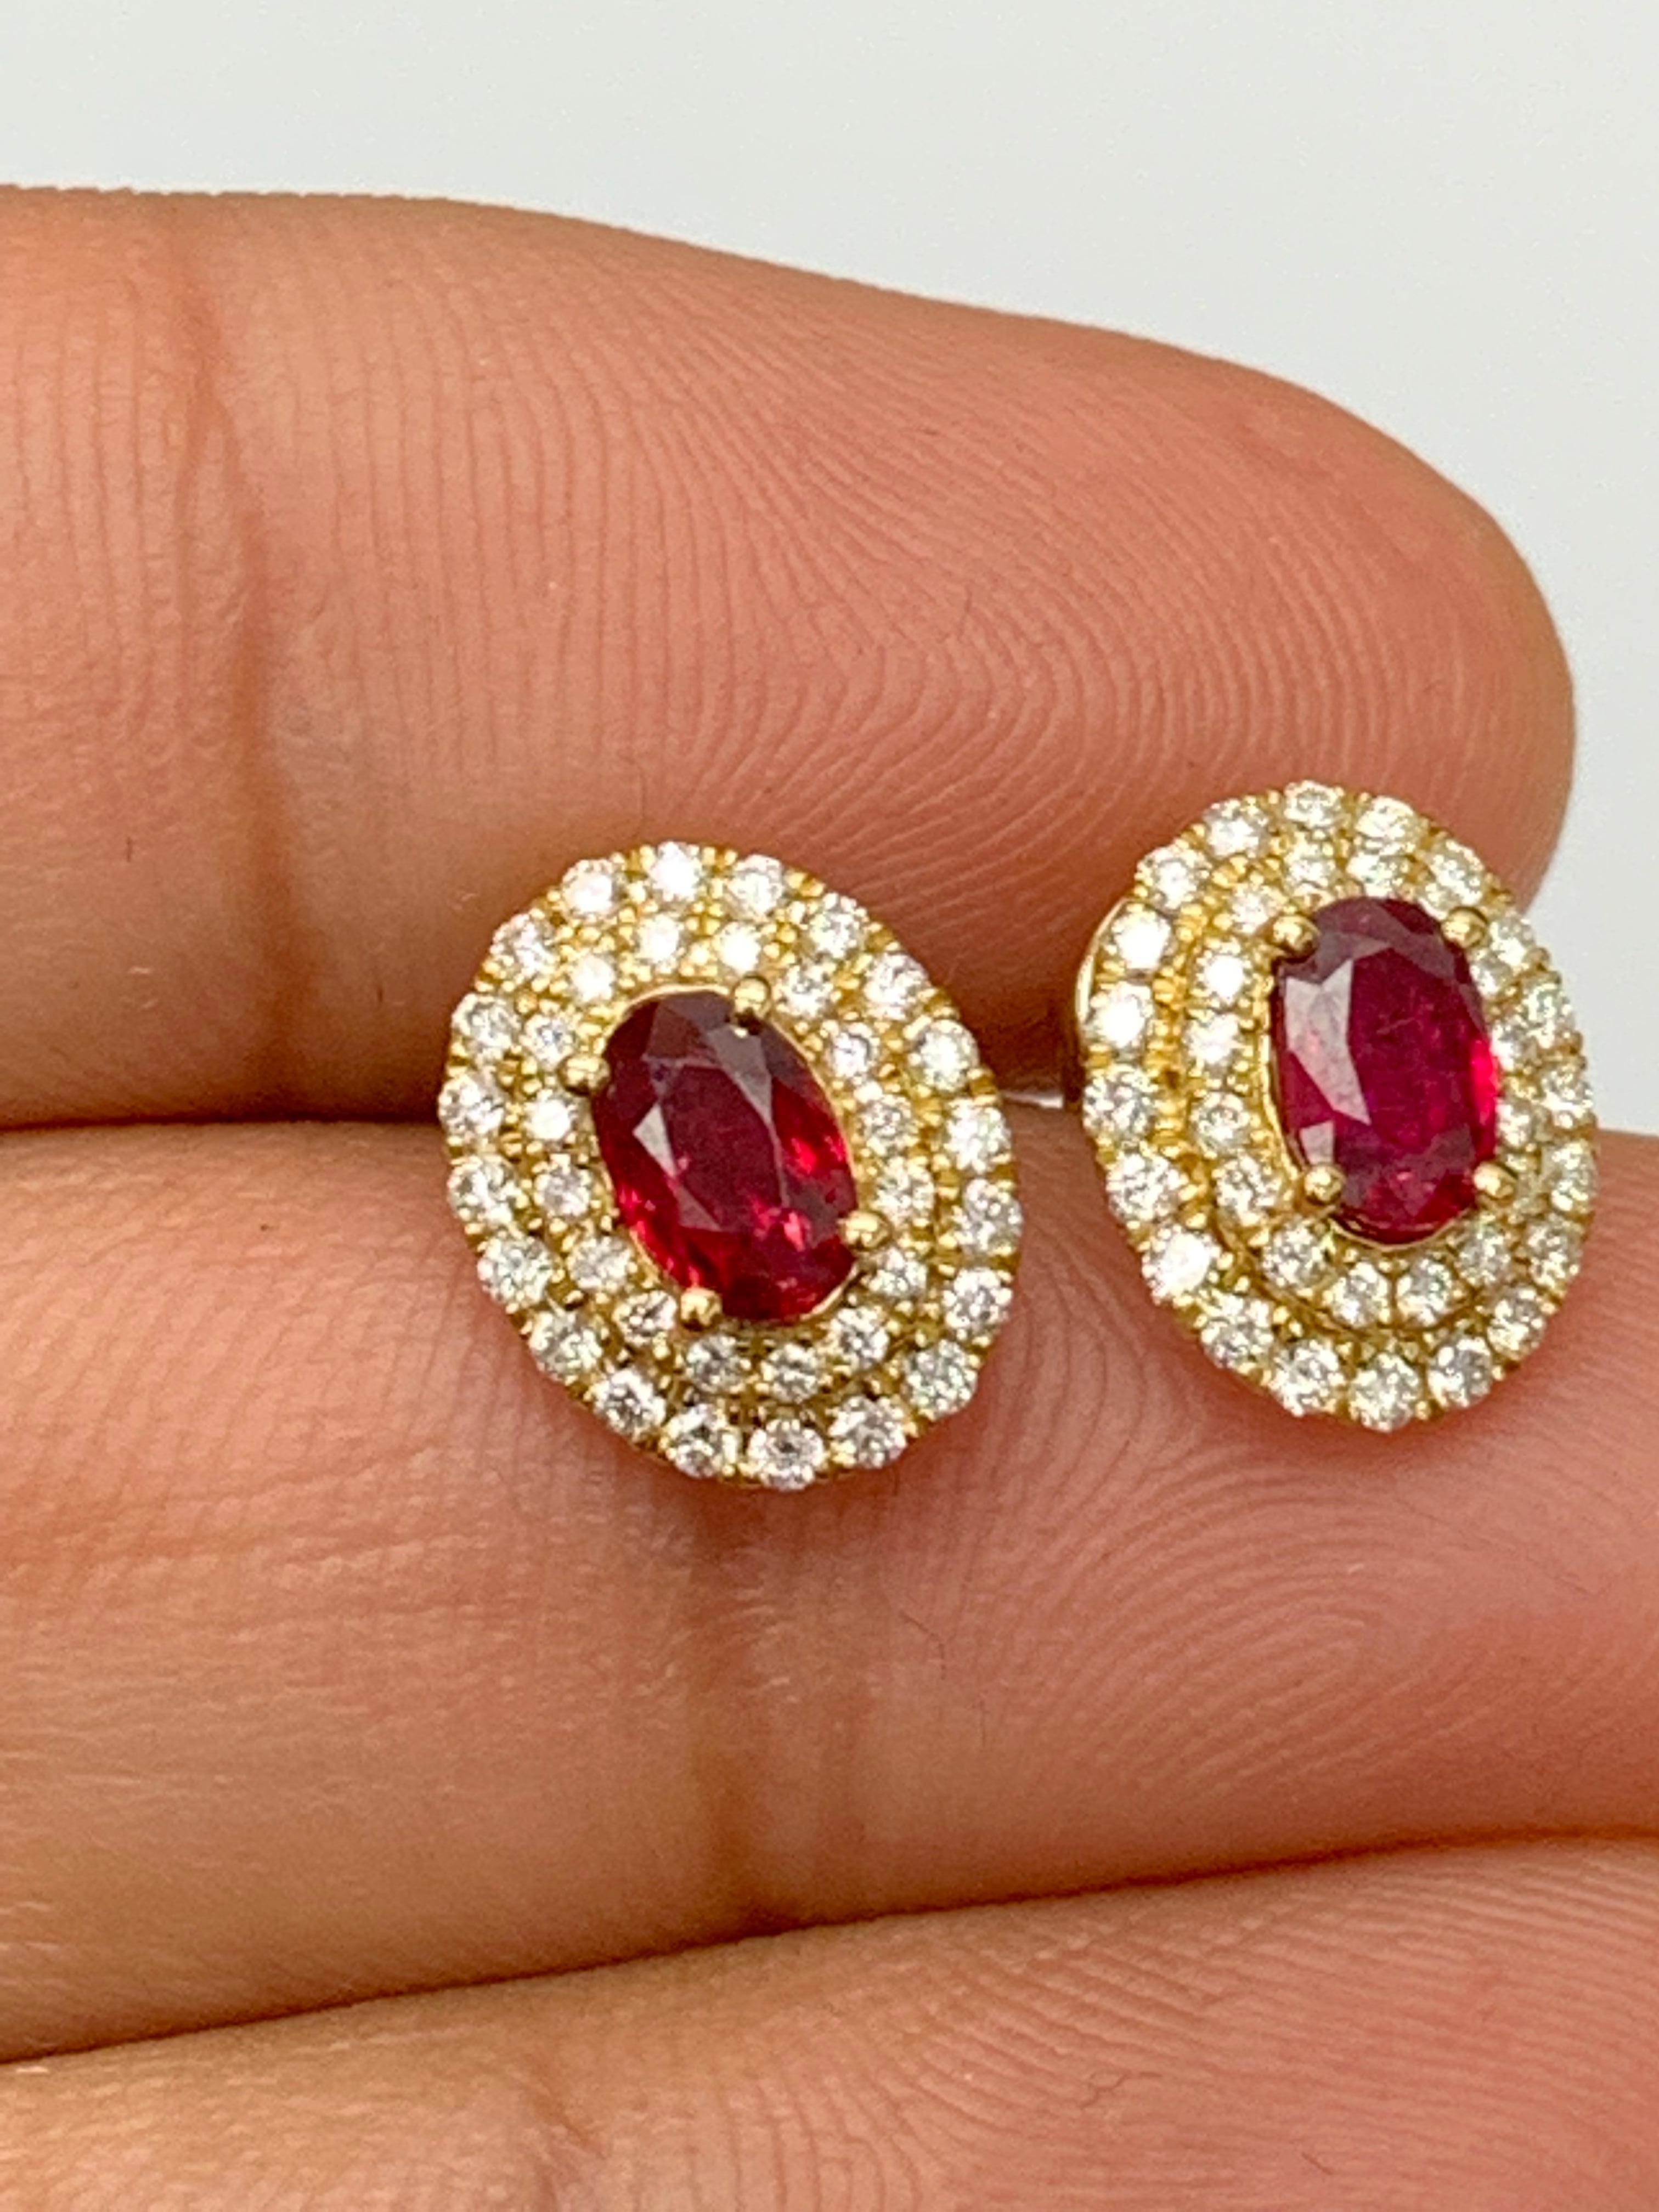 0.98 Carat Oval Cut Ruby and Diamond Stud Earrings in 18K Yellow Gold For Sale 3